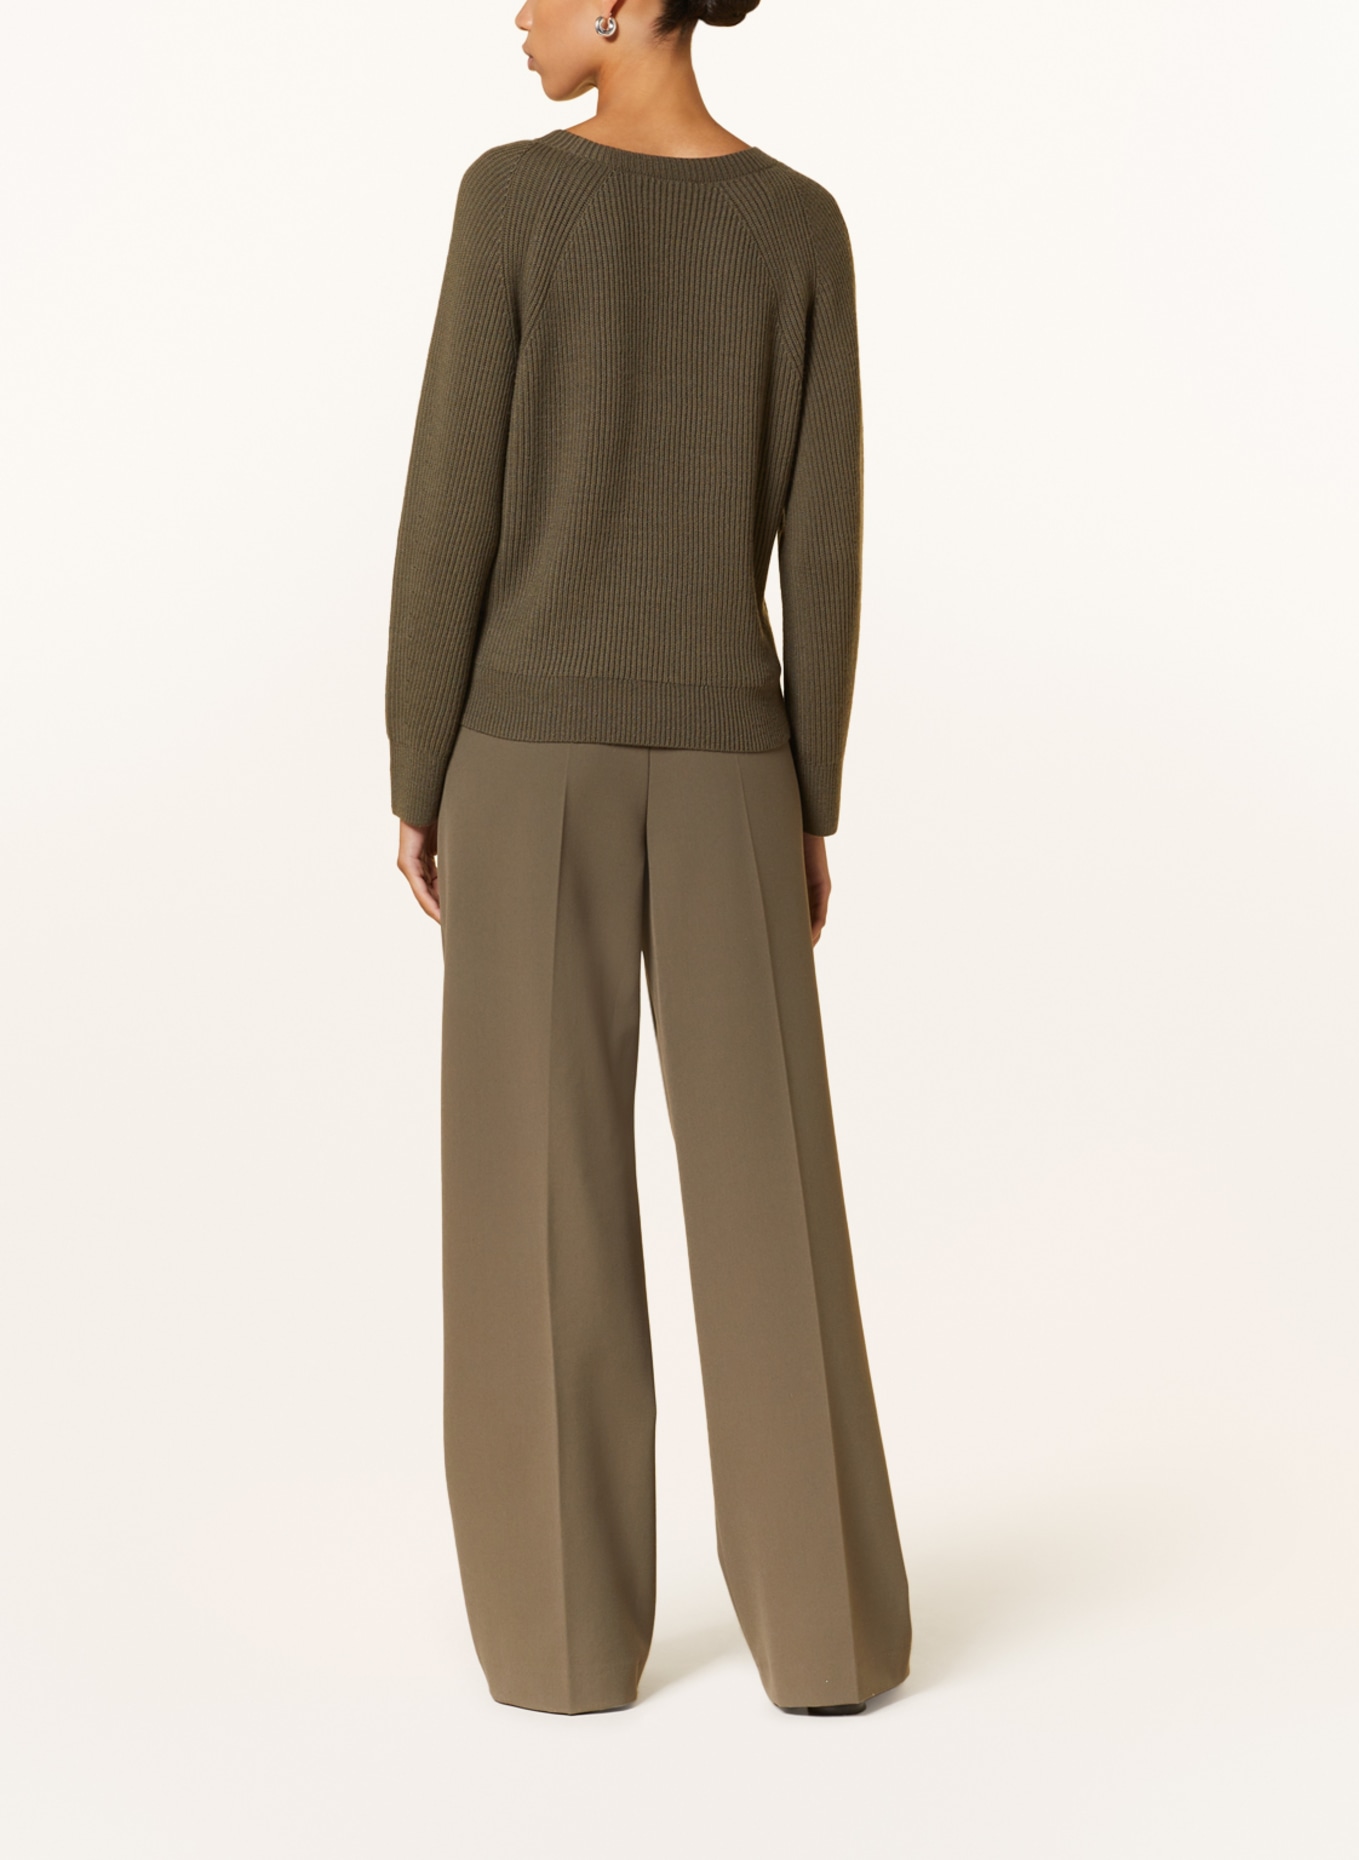 LUISA CERANO Sweater with cut-outs, Color: KHAKI (Image 3)